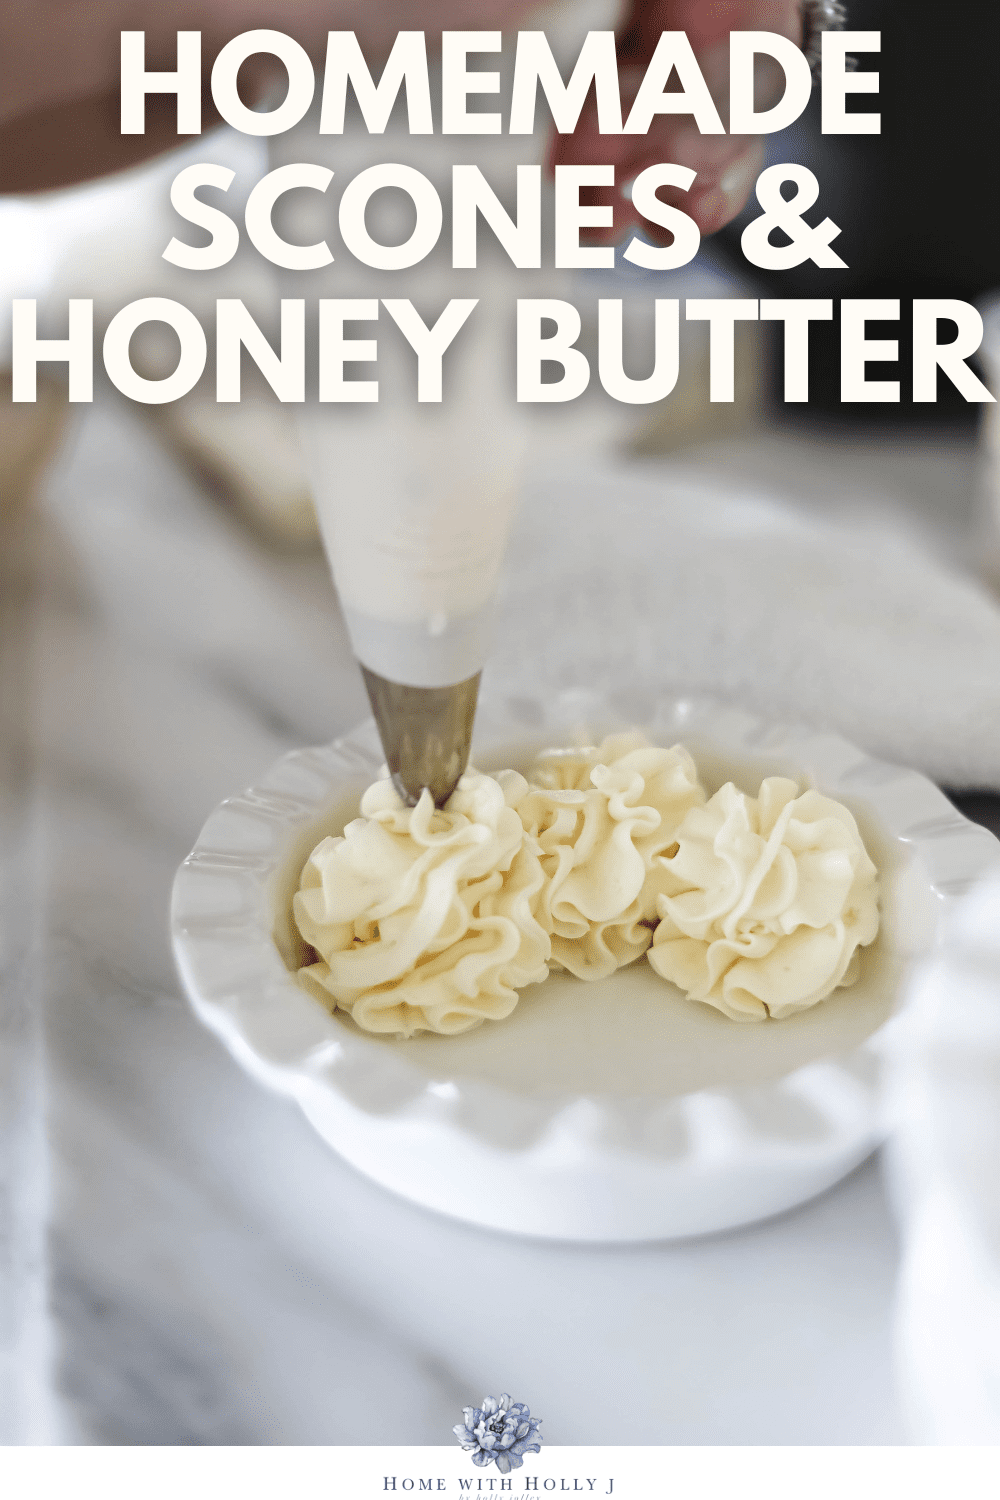 In Utah, deep-fried bread is called a scone. Top the scone with this amazingly delicious honey butter and you have a match made in heaven.